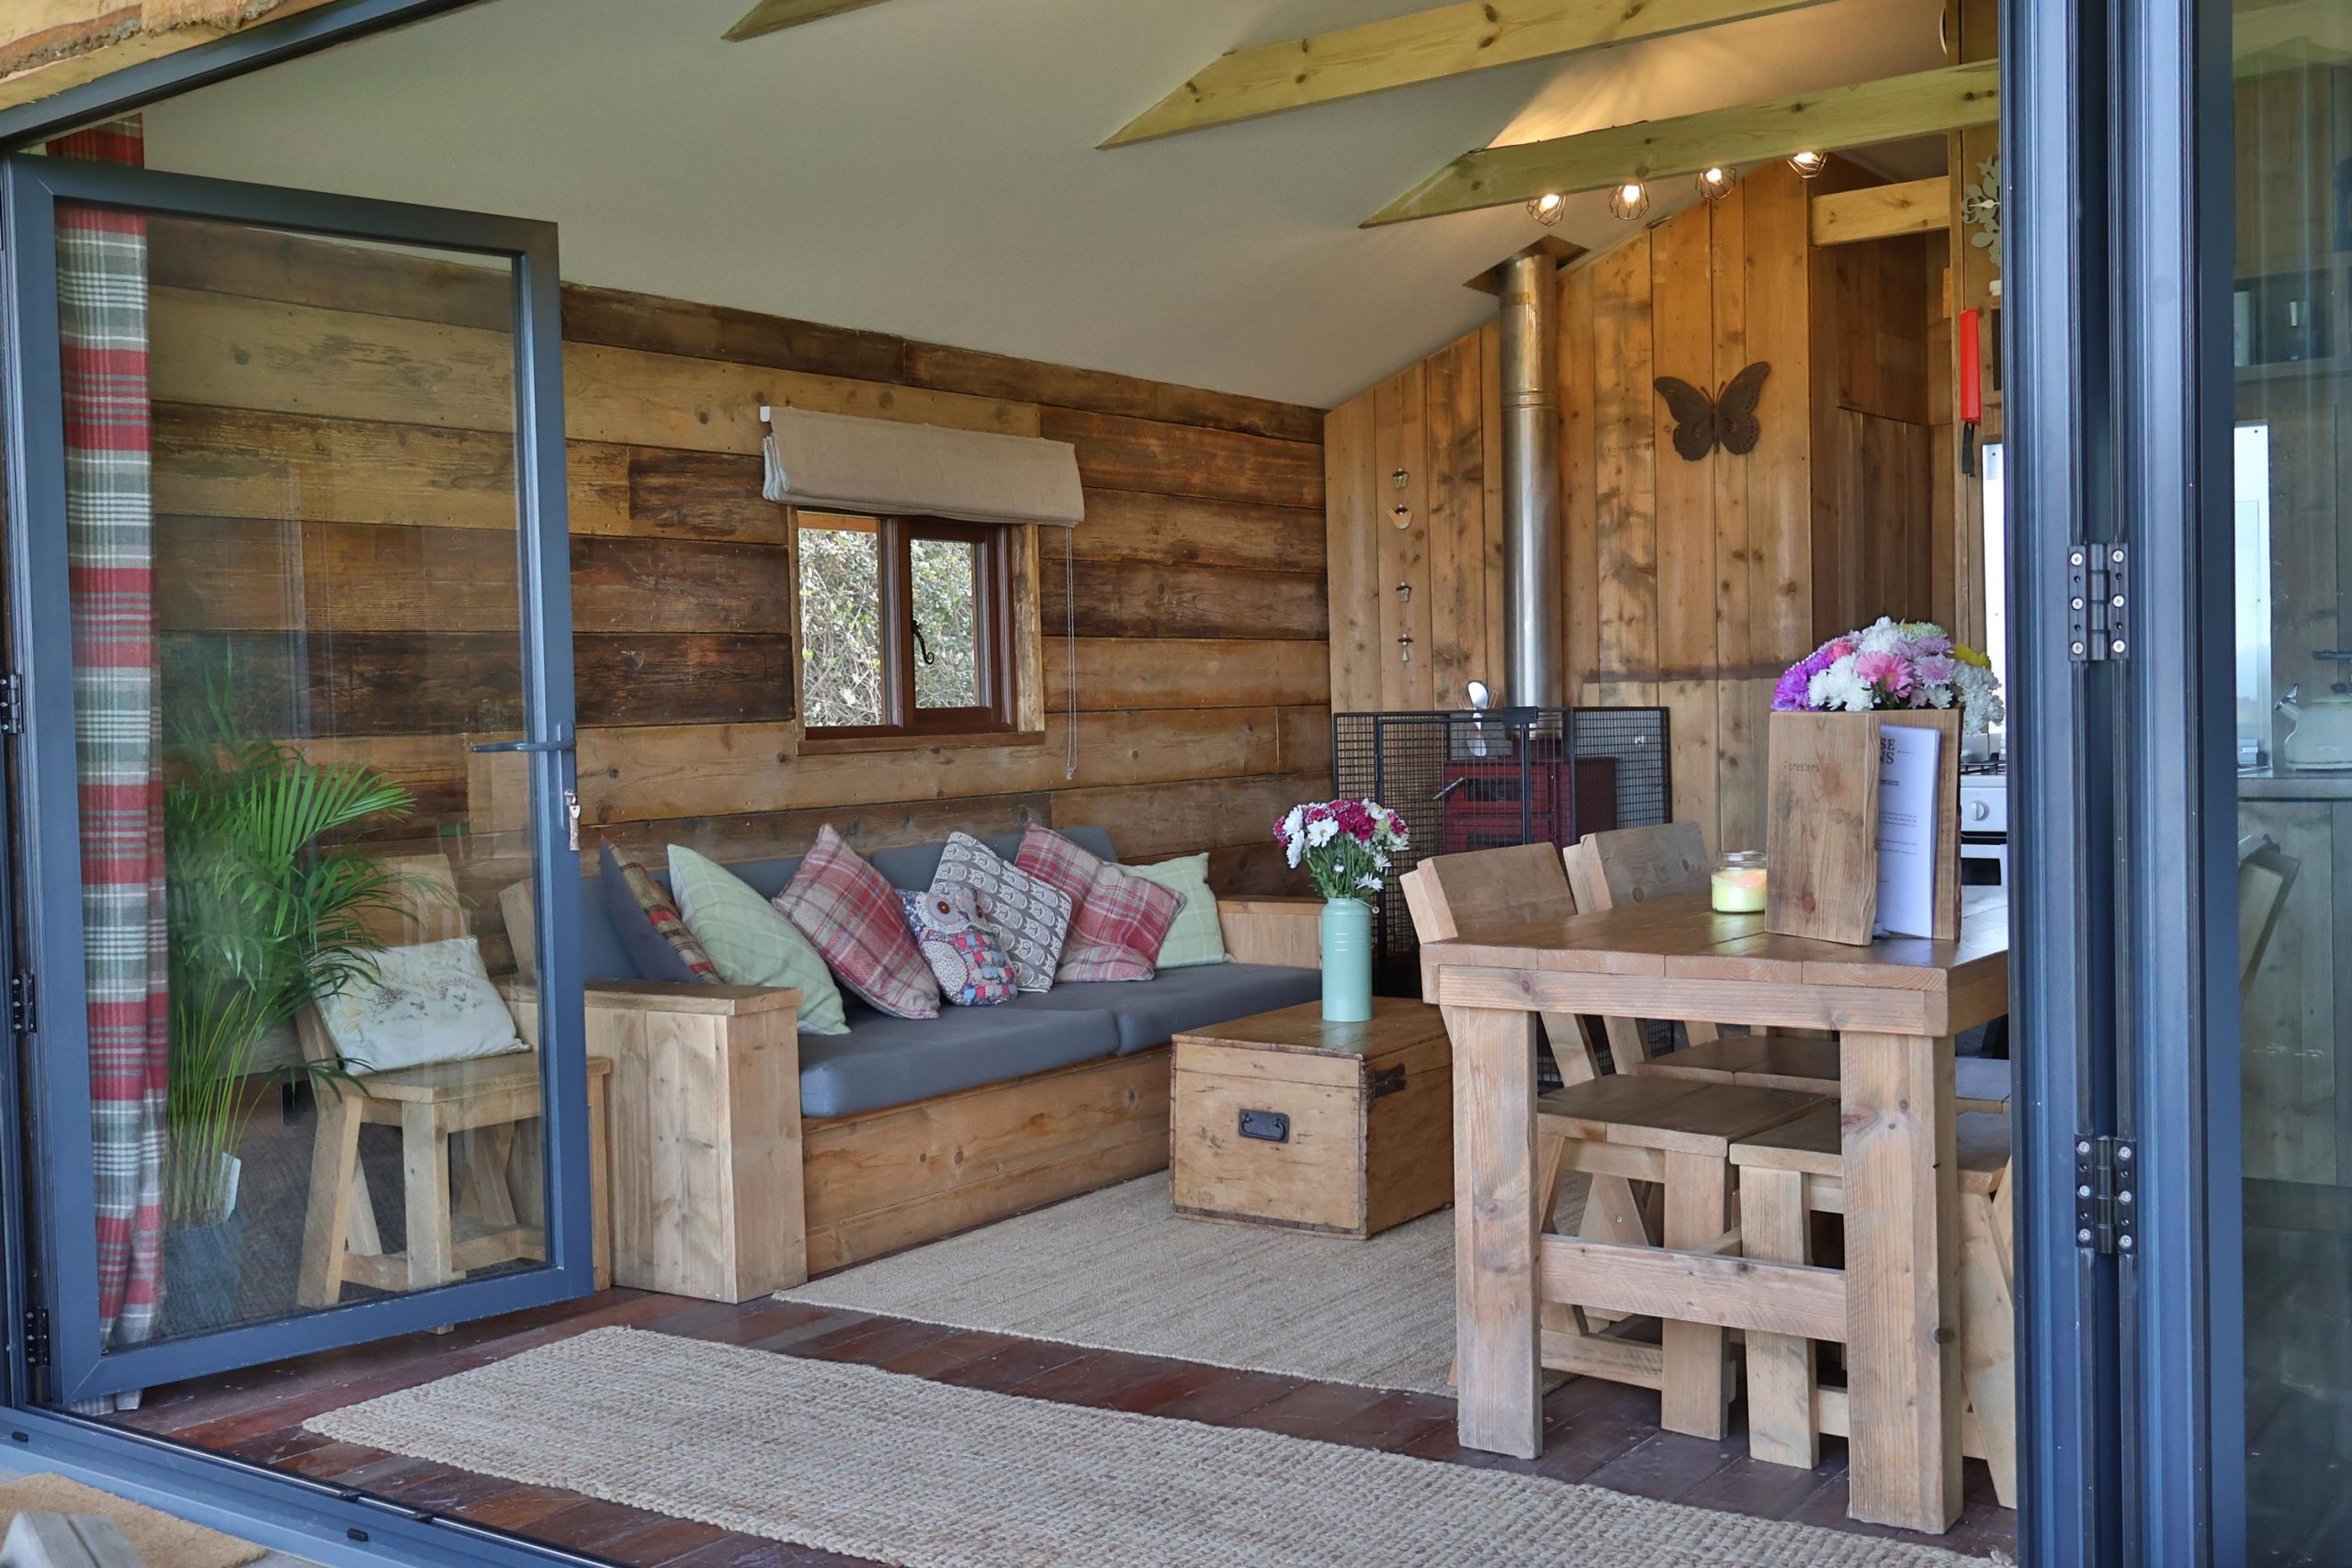 View from the Foresters cabin deck looking in through the bifold doors to the stunning lounge with sofa, wood burner and kitchen table in view.